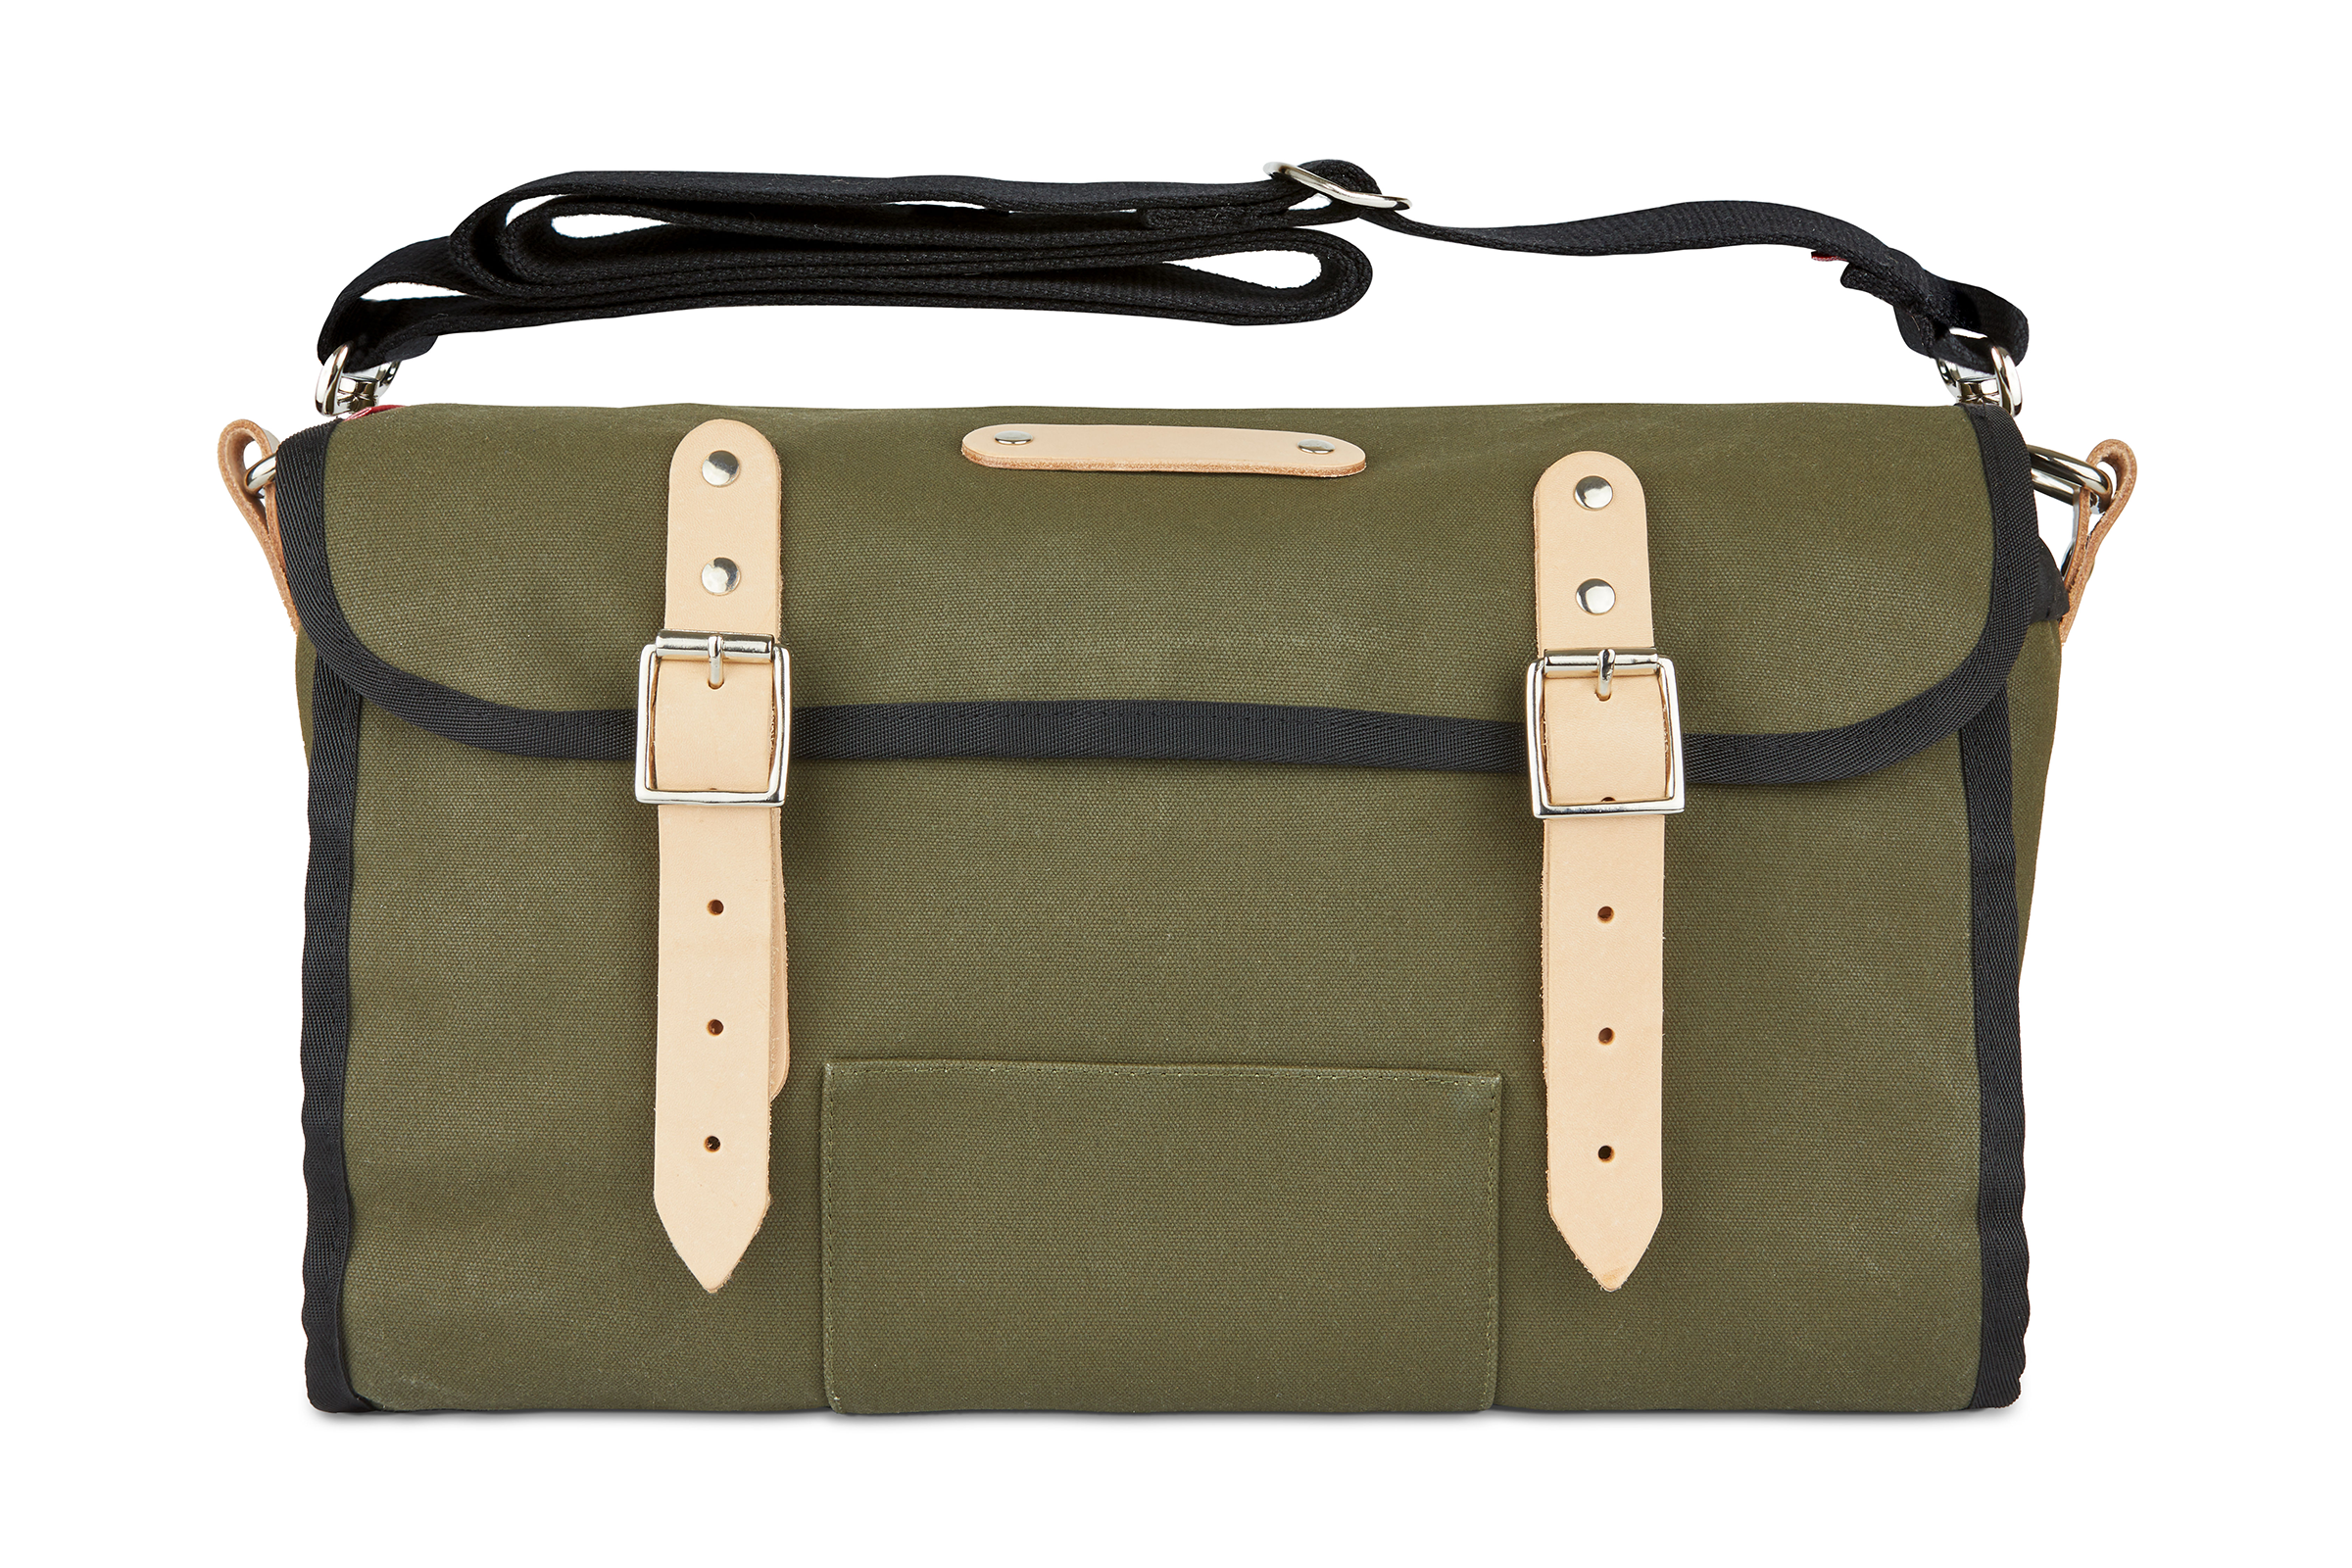 Frost and Sekers Otis saddle bag. Green canvas with tan leather.